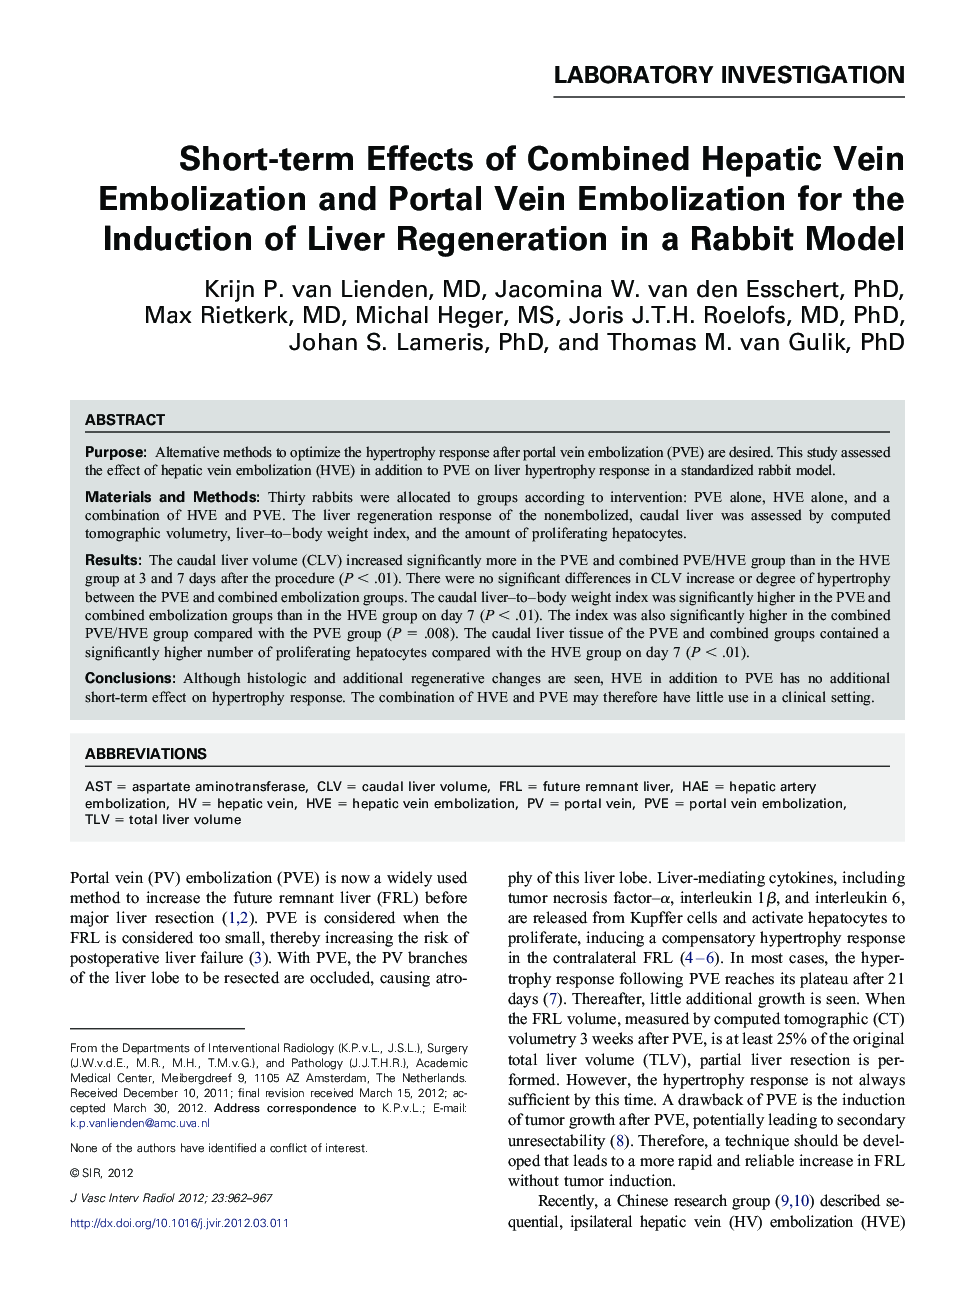 Short-term Effects of Combined Hepatic Vein Embolization and Portal Vein Embolization for the Induction of Liver Regeneration in a Rabbit Model